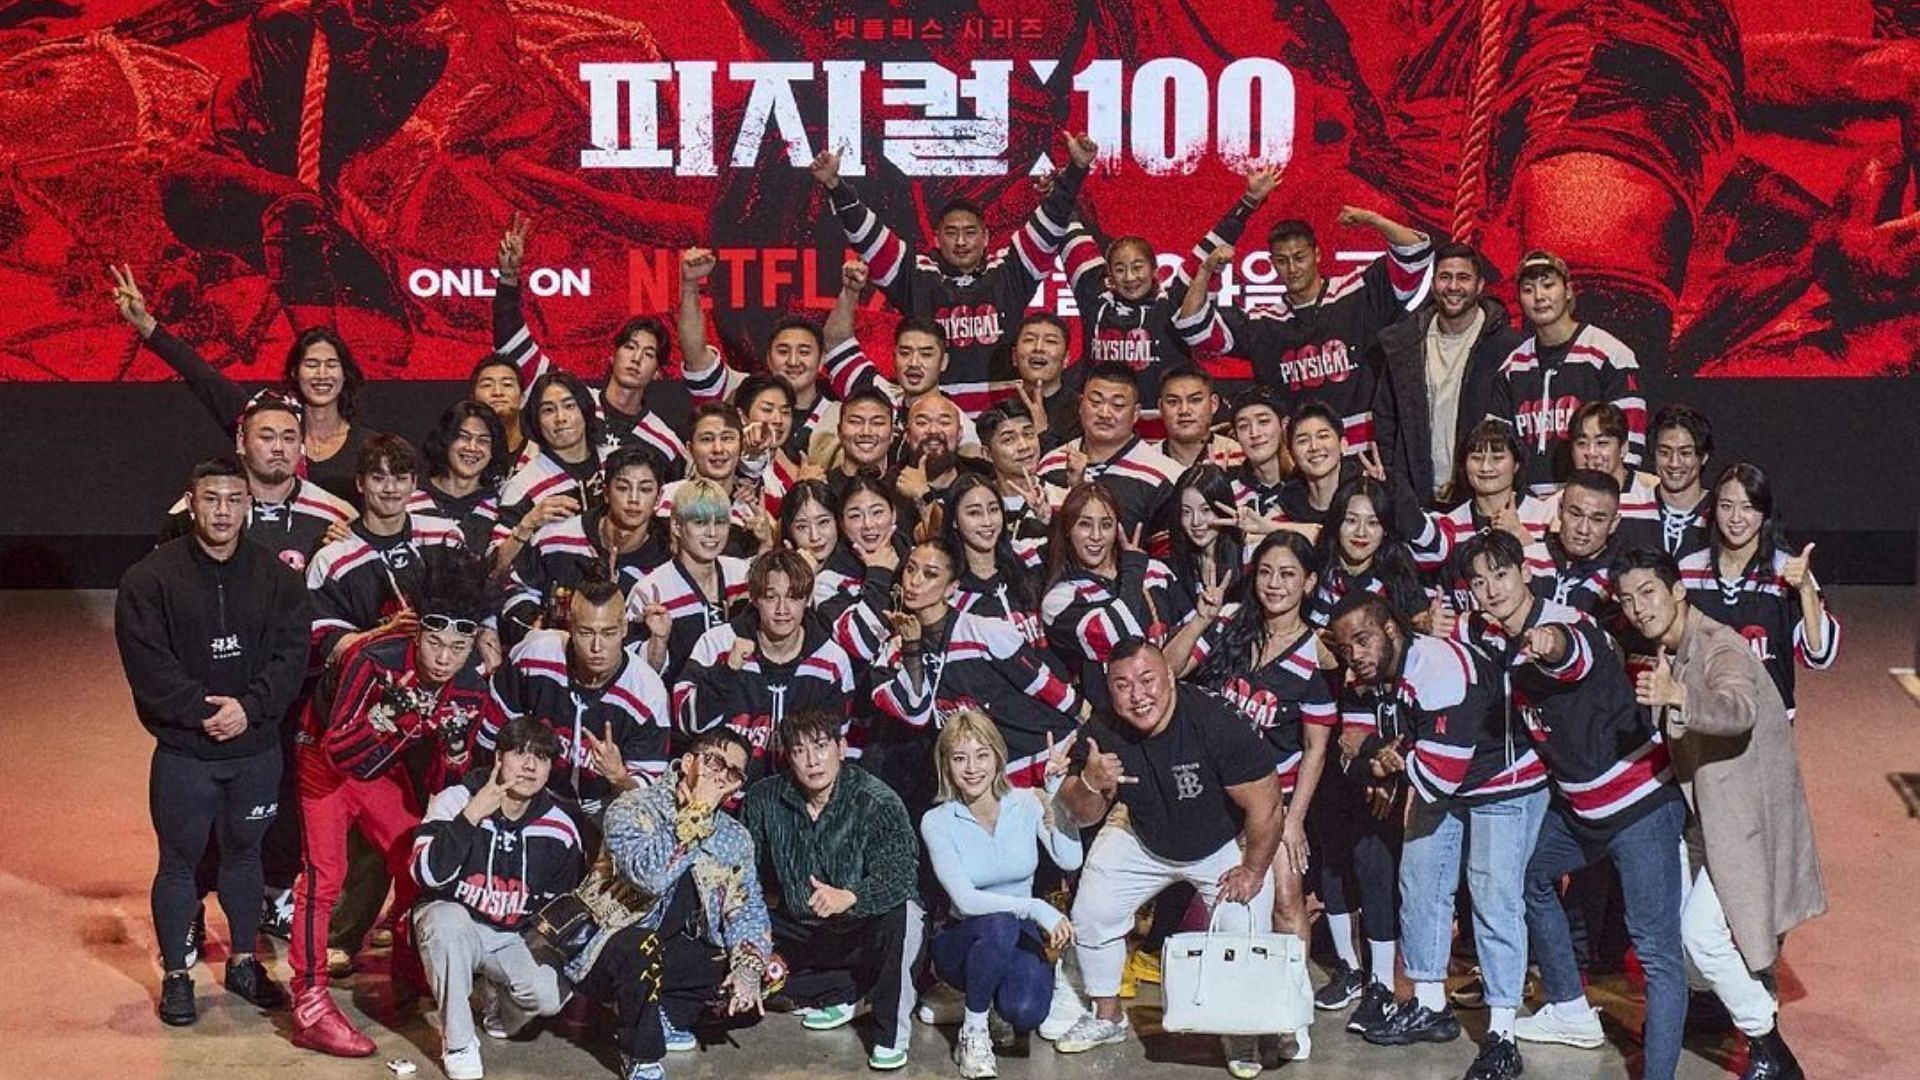 Physical 100 is all set to air two episodes on Tuesday